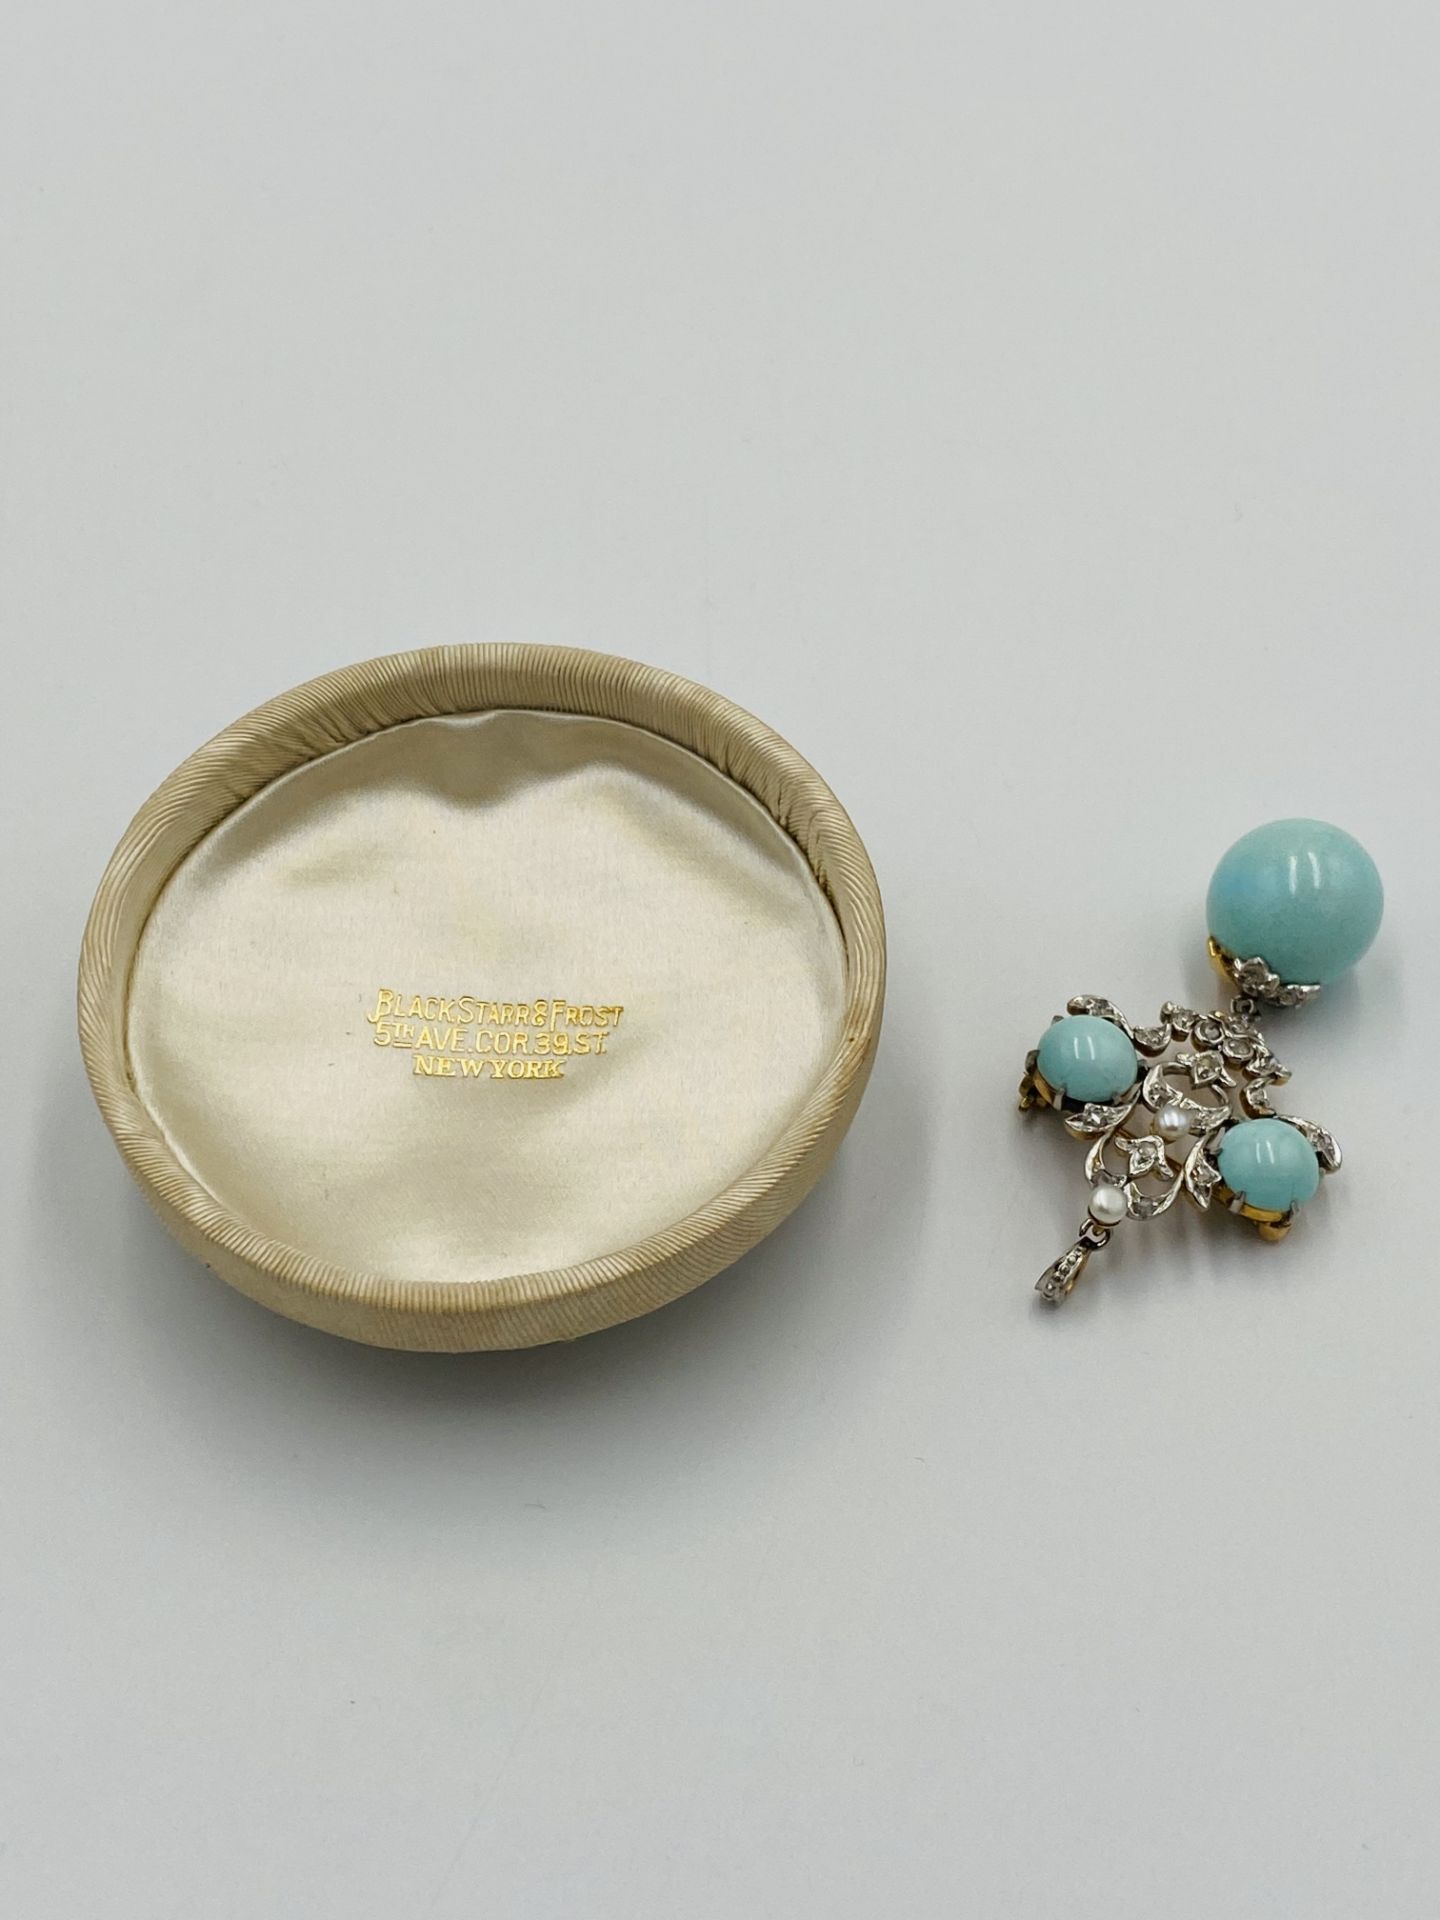 Turquoise and diamond brooch/pendant - Image 4 of 5